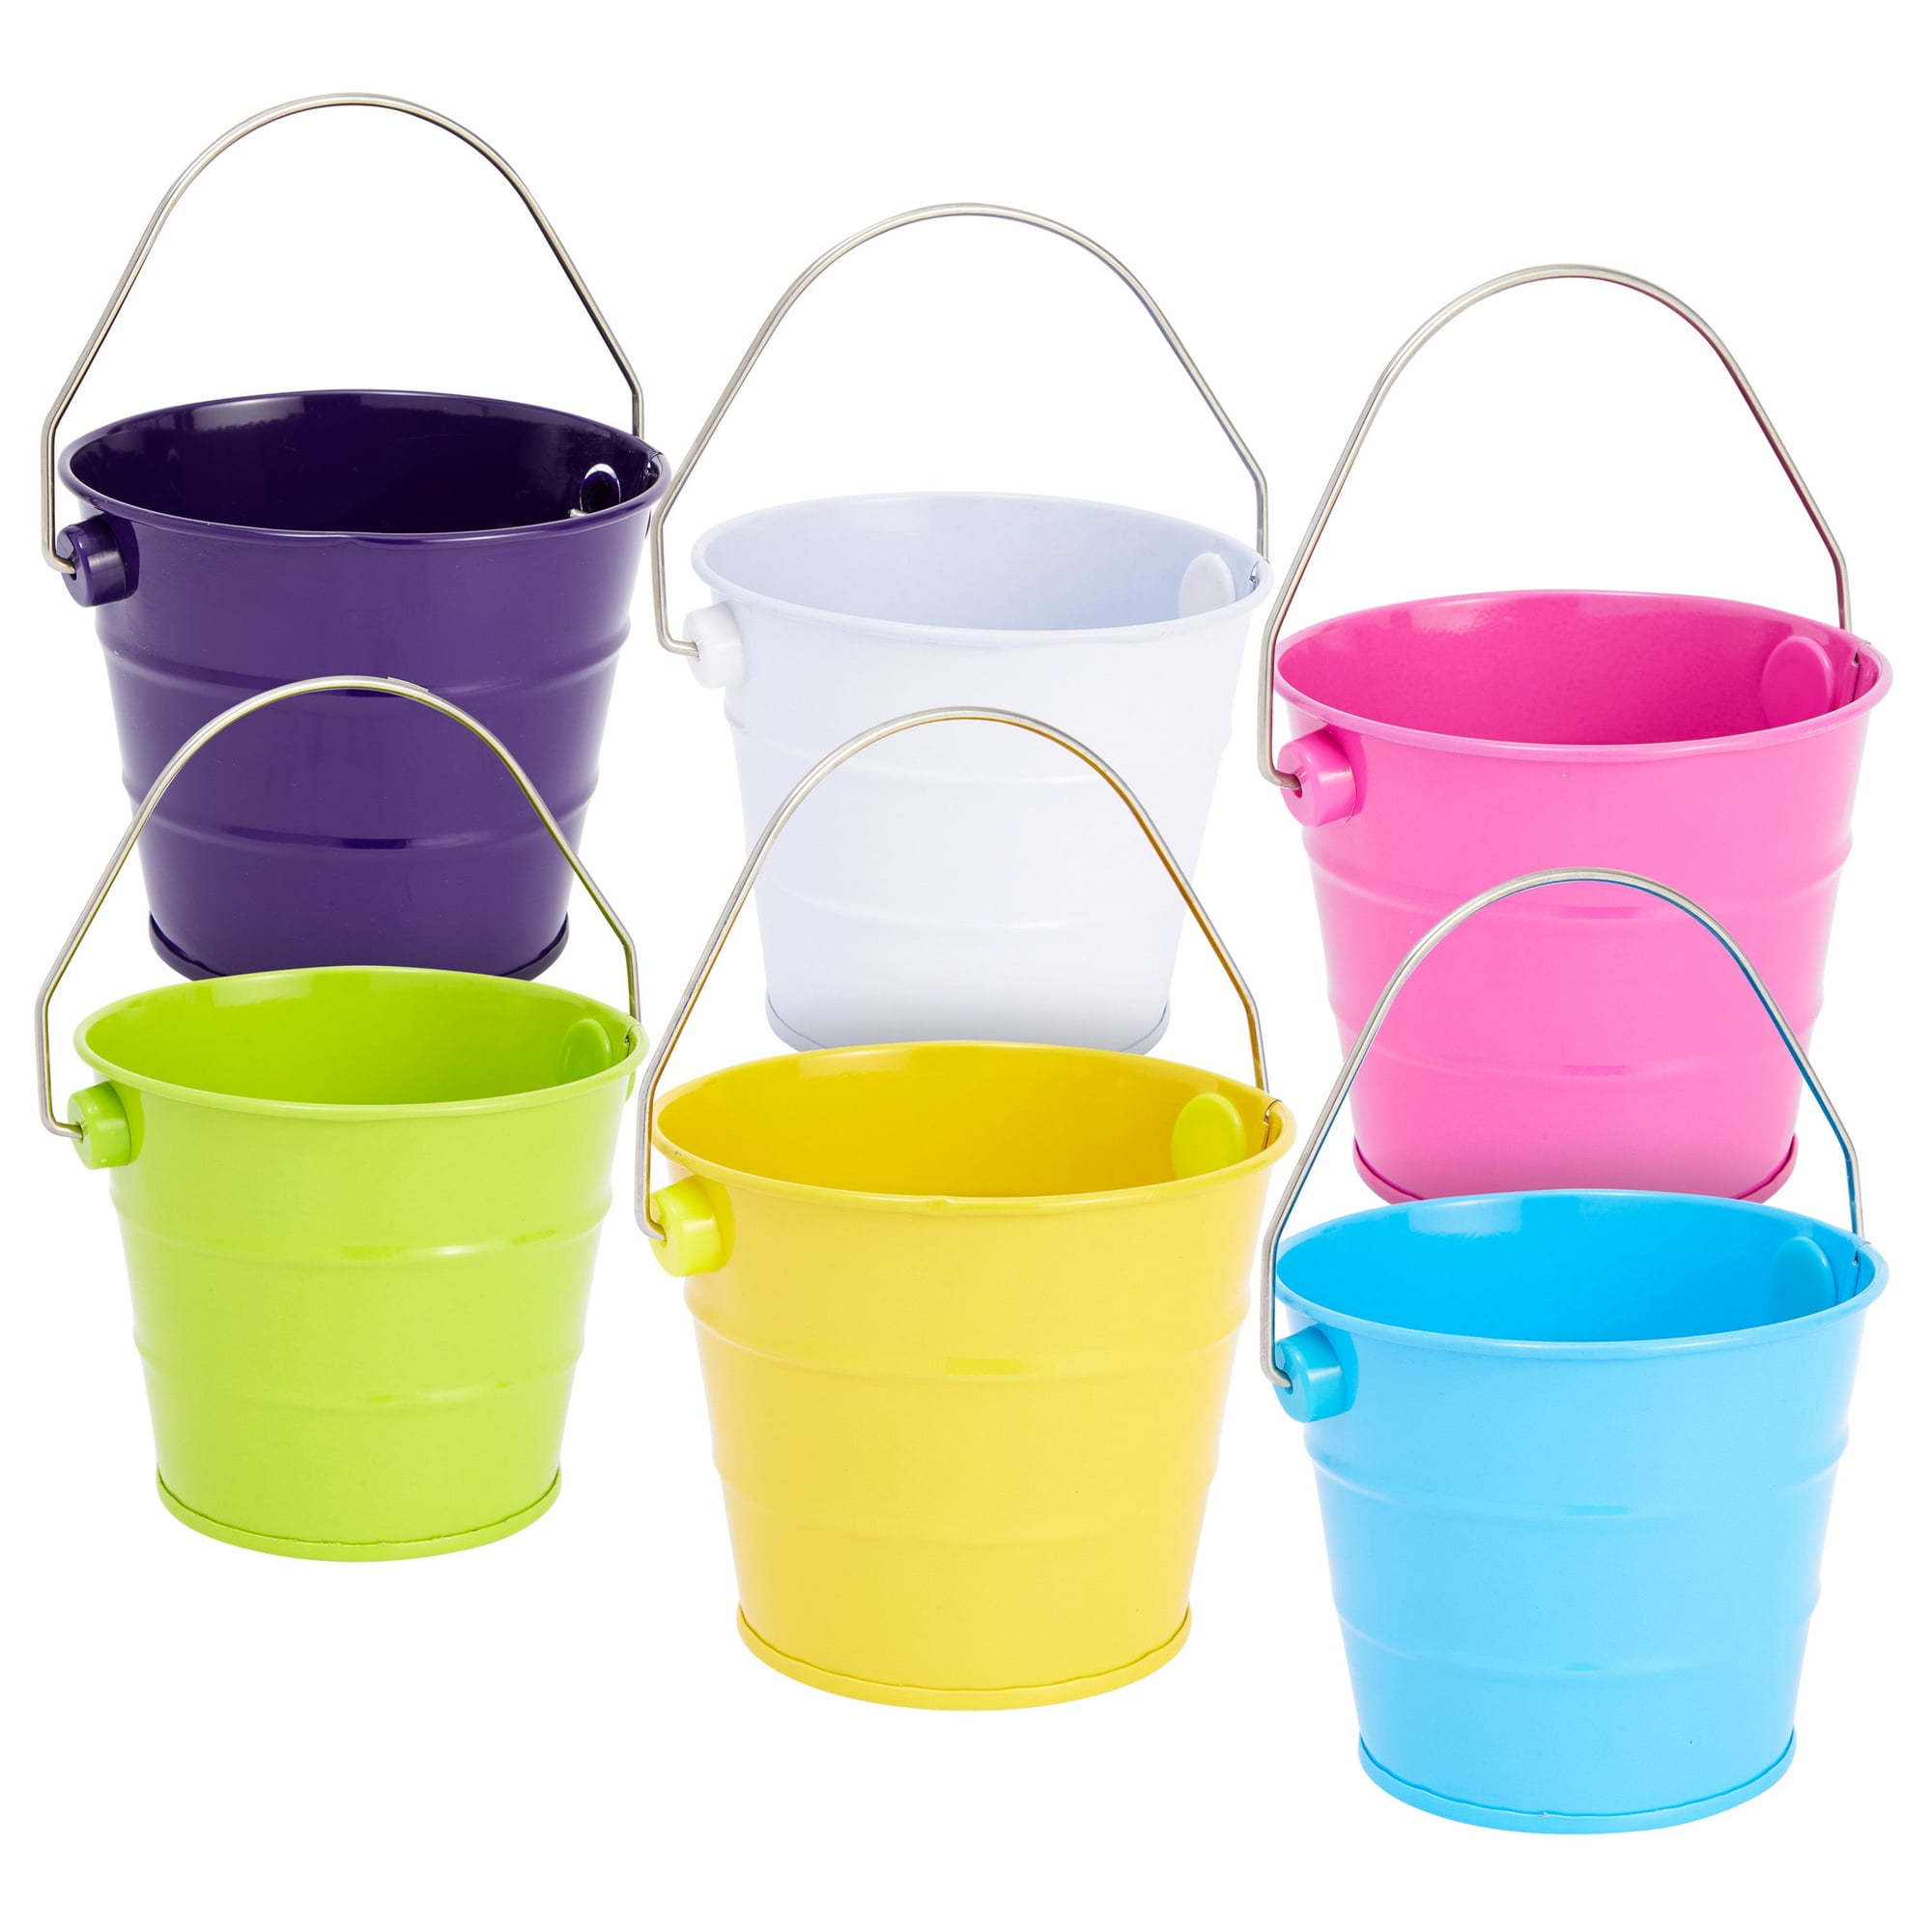 6Pcs 2x2 Small Metal Bucket Colorful Mini Buckets with Handles Light Blue